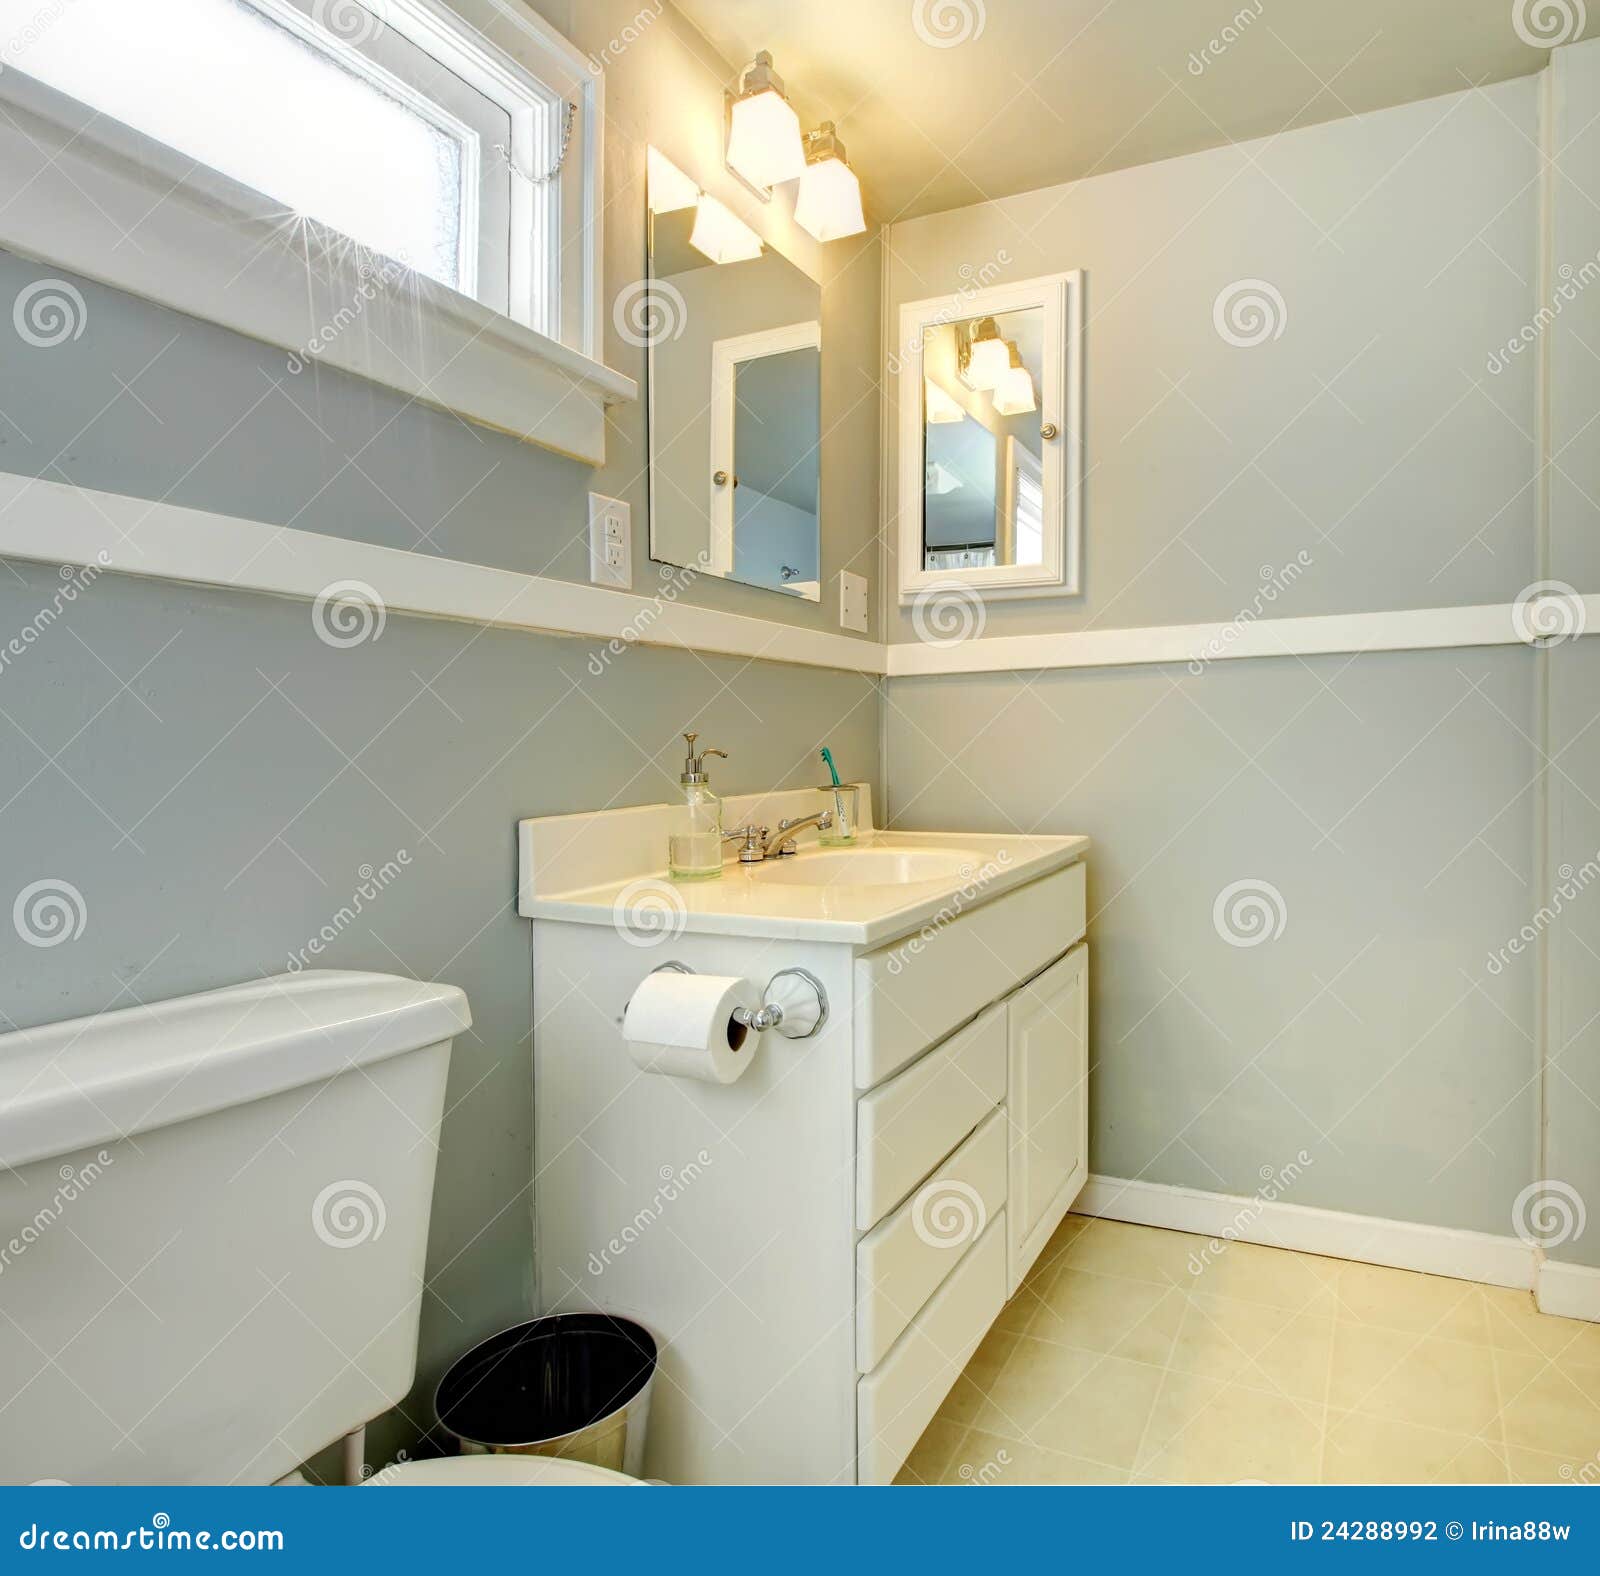 Grey Bathroom With White Simple Cabinet. Stock Photography - Image 